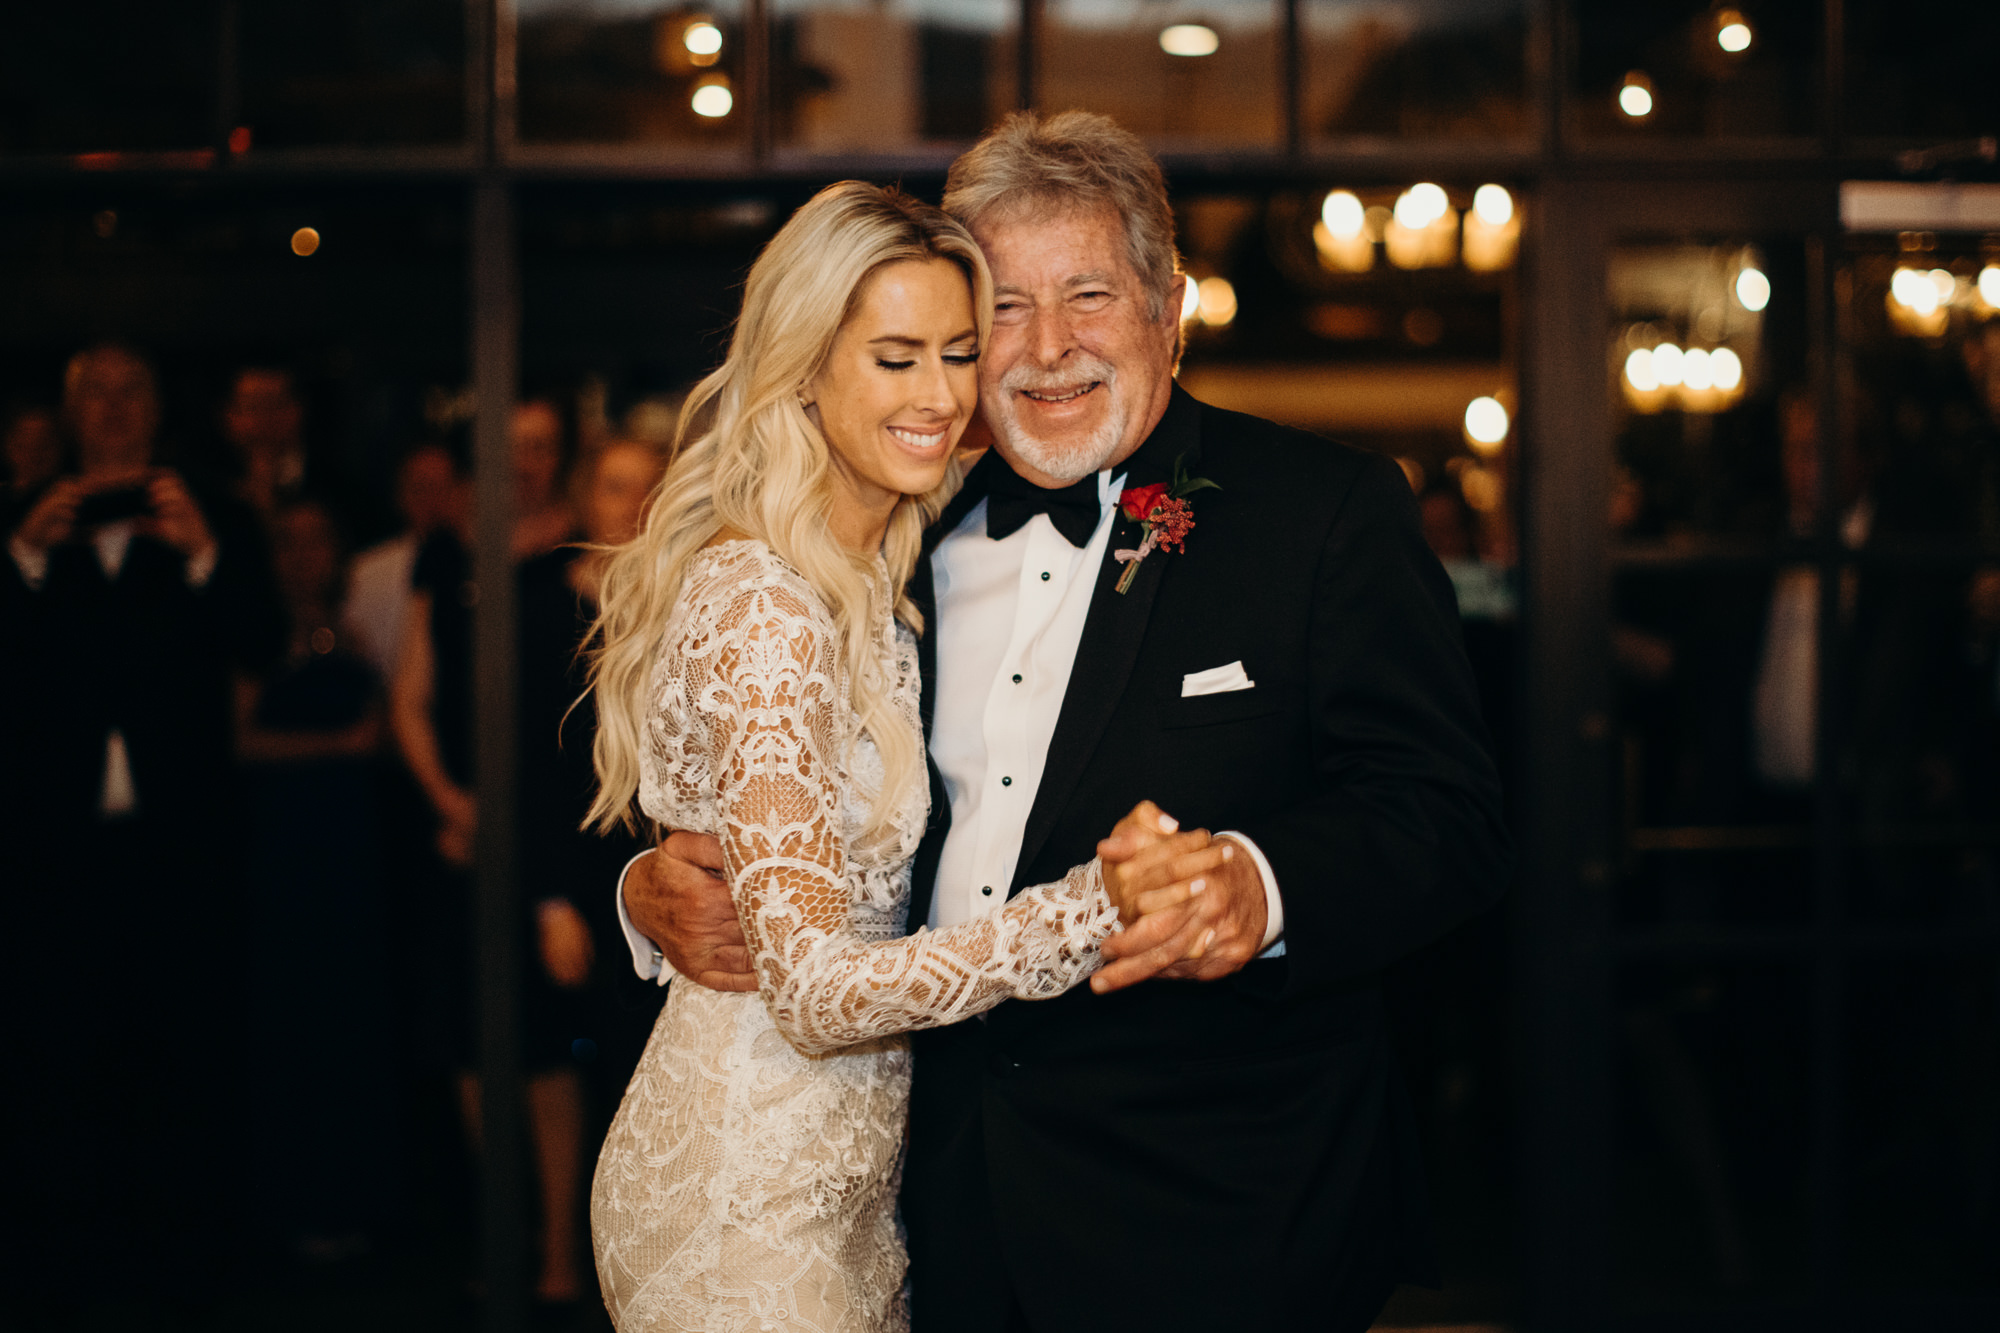 bride dances with father at wedding reception at five crowns in newport beach, CA